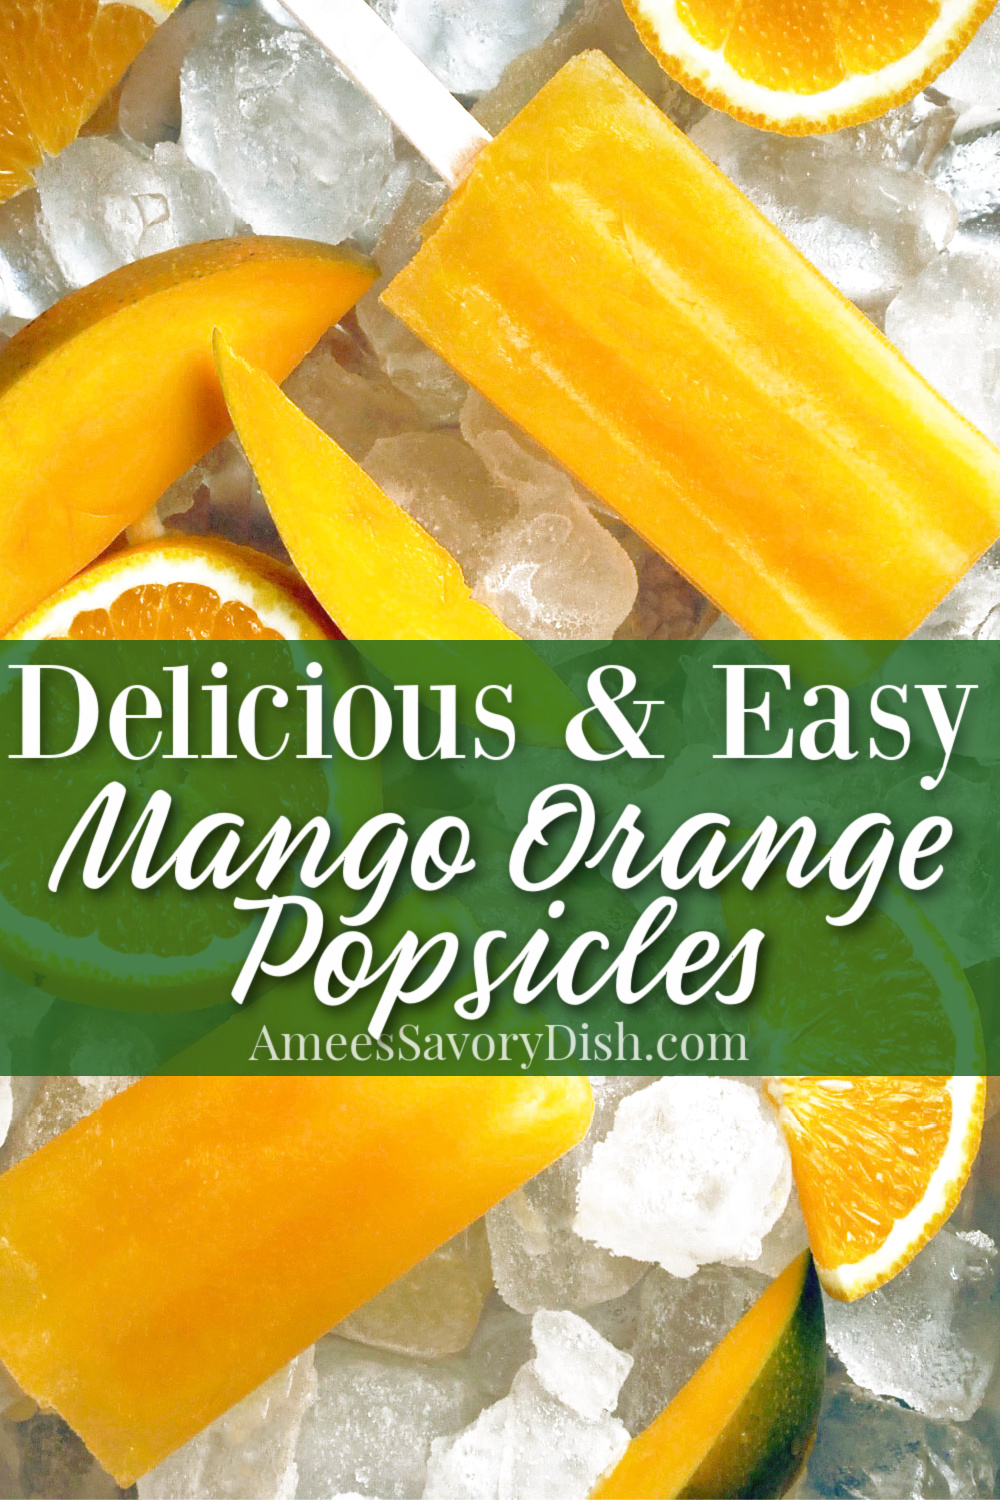 Easy mango orange popsicles are a perfect kid-friendly summer frozen treat and a great healthier option because there are no added sweeteners!  #orangepopsicles #homemadepopsicles #frozenfruitpops #popsicles via @Ameessavorydish